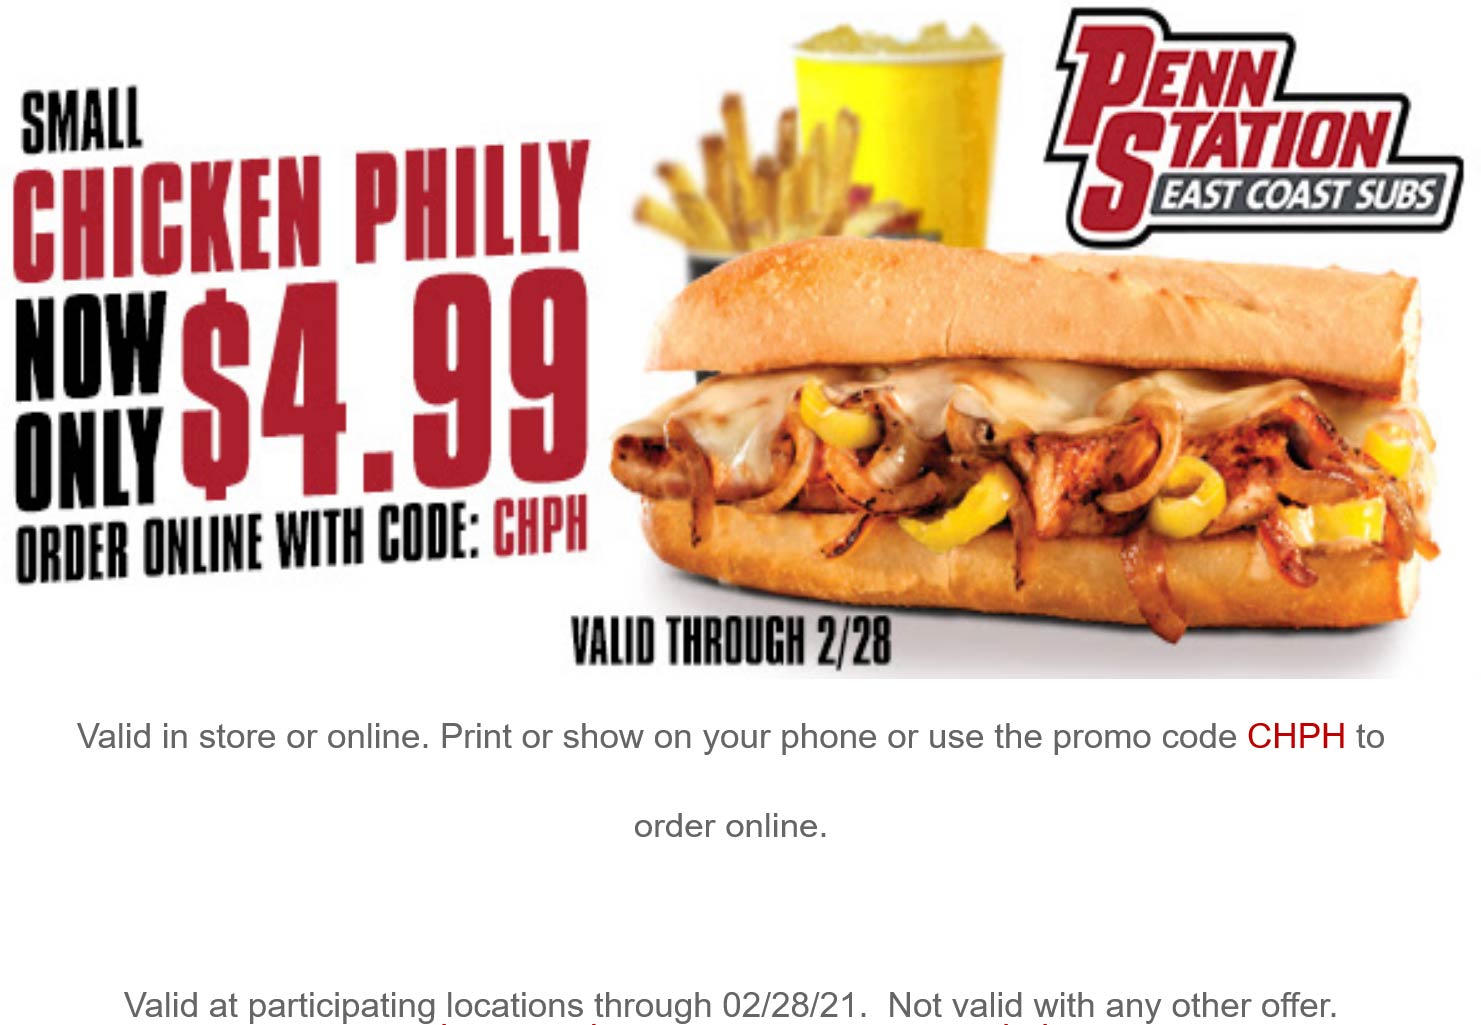 [March, 2021] 5 chicken philly sub sandwich at Penn Station via promo